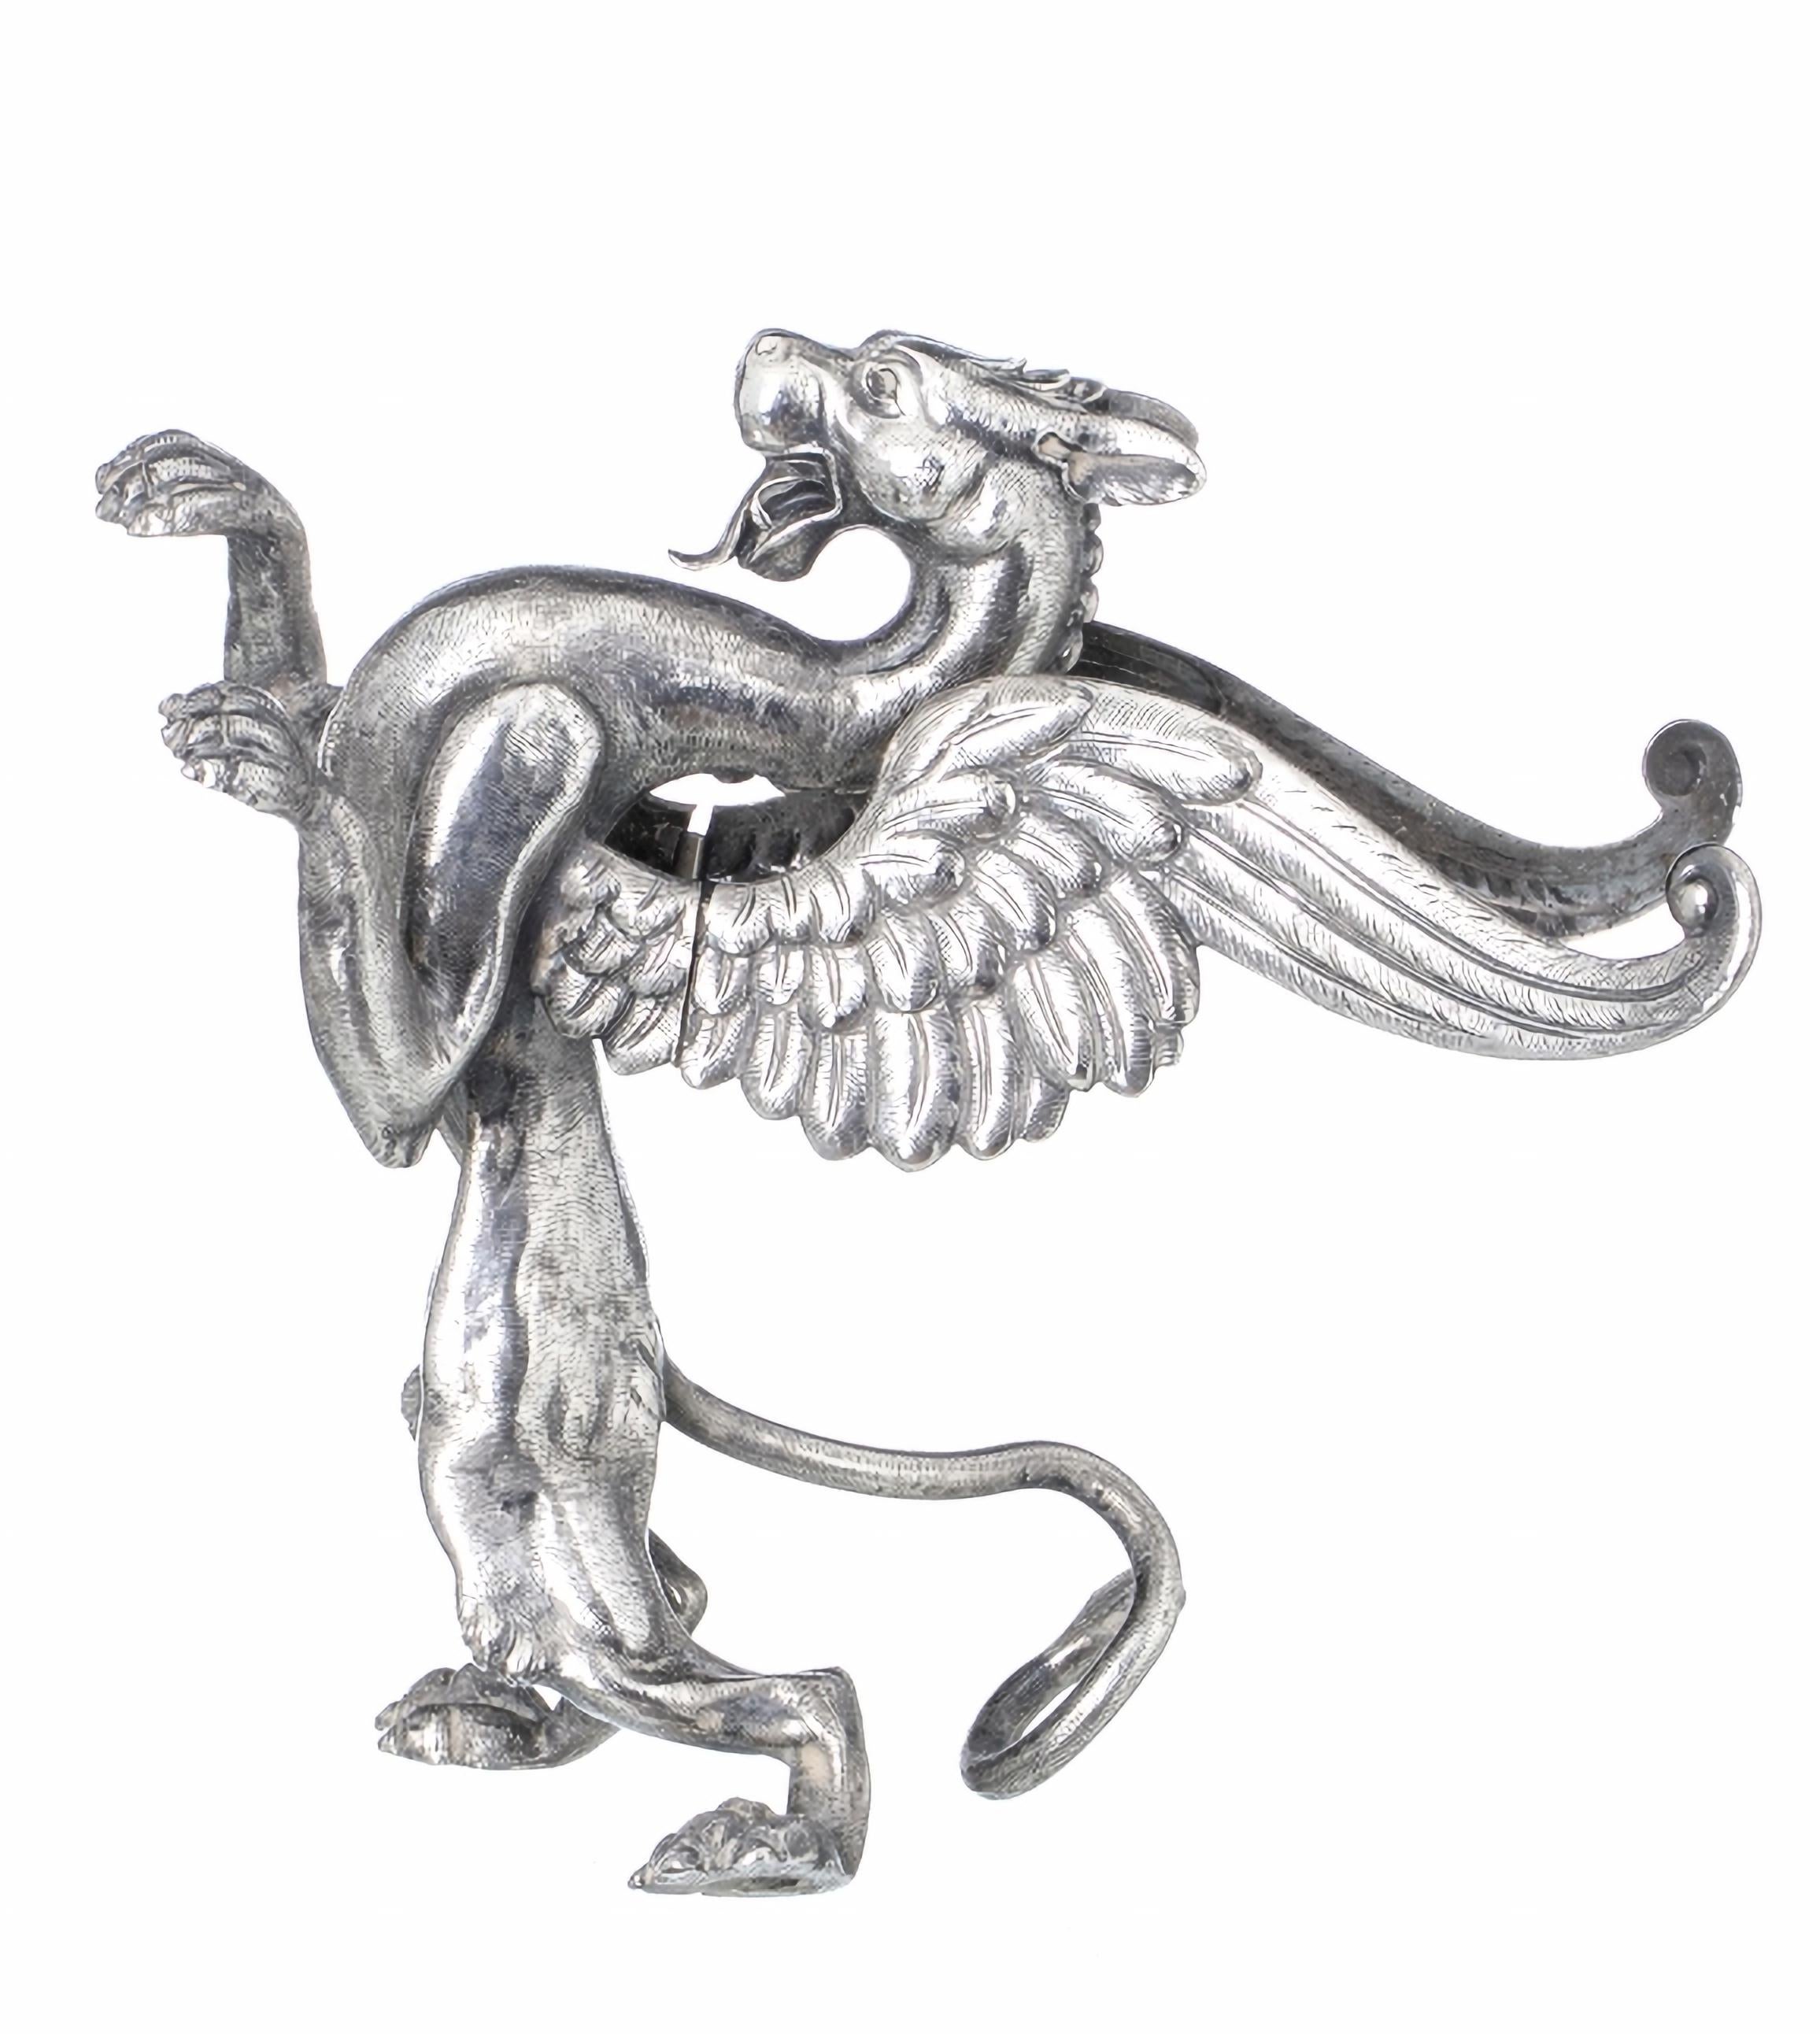 PAIR OF DRAGONS IN PORTUGUESE SILVER 20th Century

with ‘eagle’ contrast of 833 thousandths, dated 1938-1984.
Approx total weight: 888 g
Dim.: 16 x 17 cm
good conditions